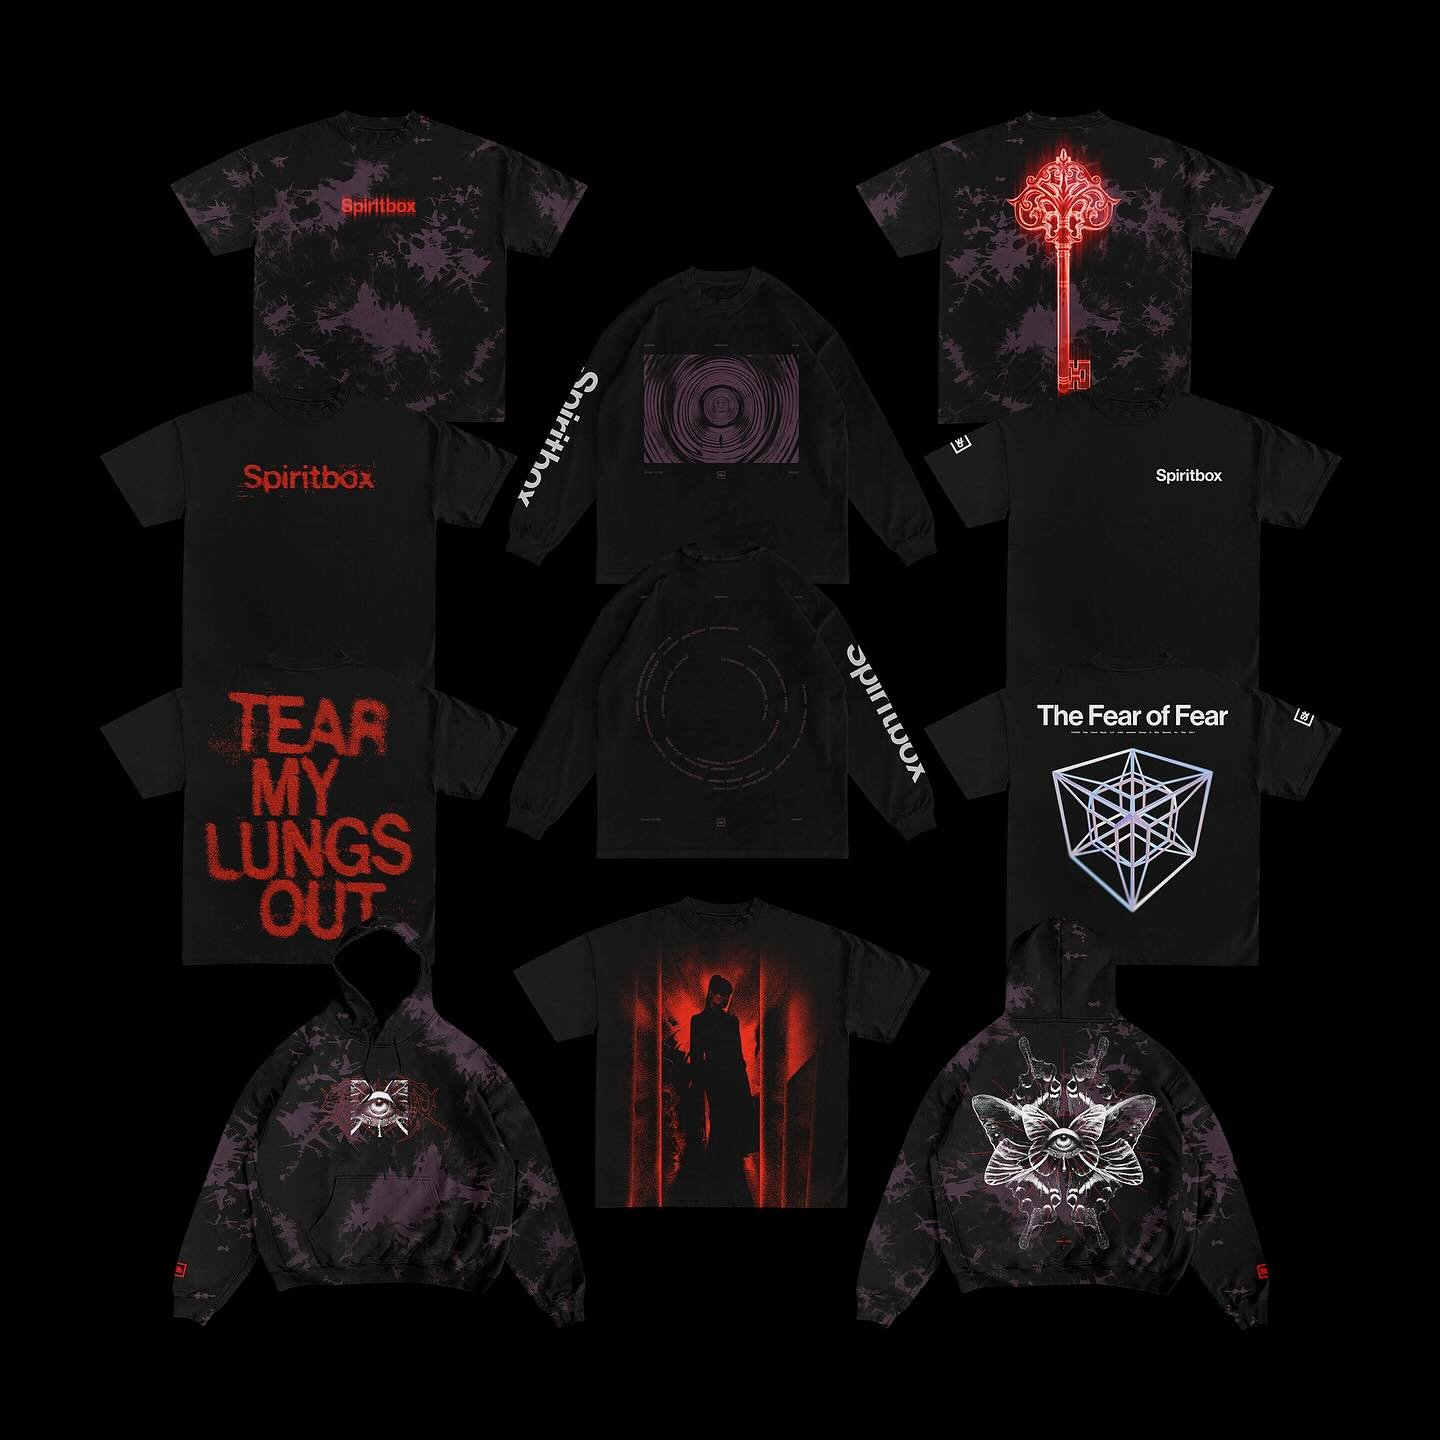 2024 EU TOUR MERCH / @spiritboxmusic

Here is the complete Spiritbox merch lineup from their EU tour with @architects and @loatheasone. We took a different approach from their previous merch, opting for simpler, bolder designs. I love how the red, pu